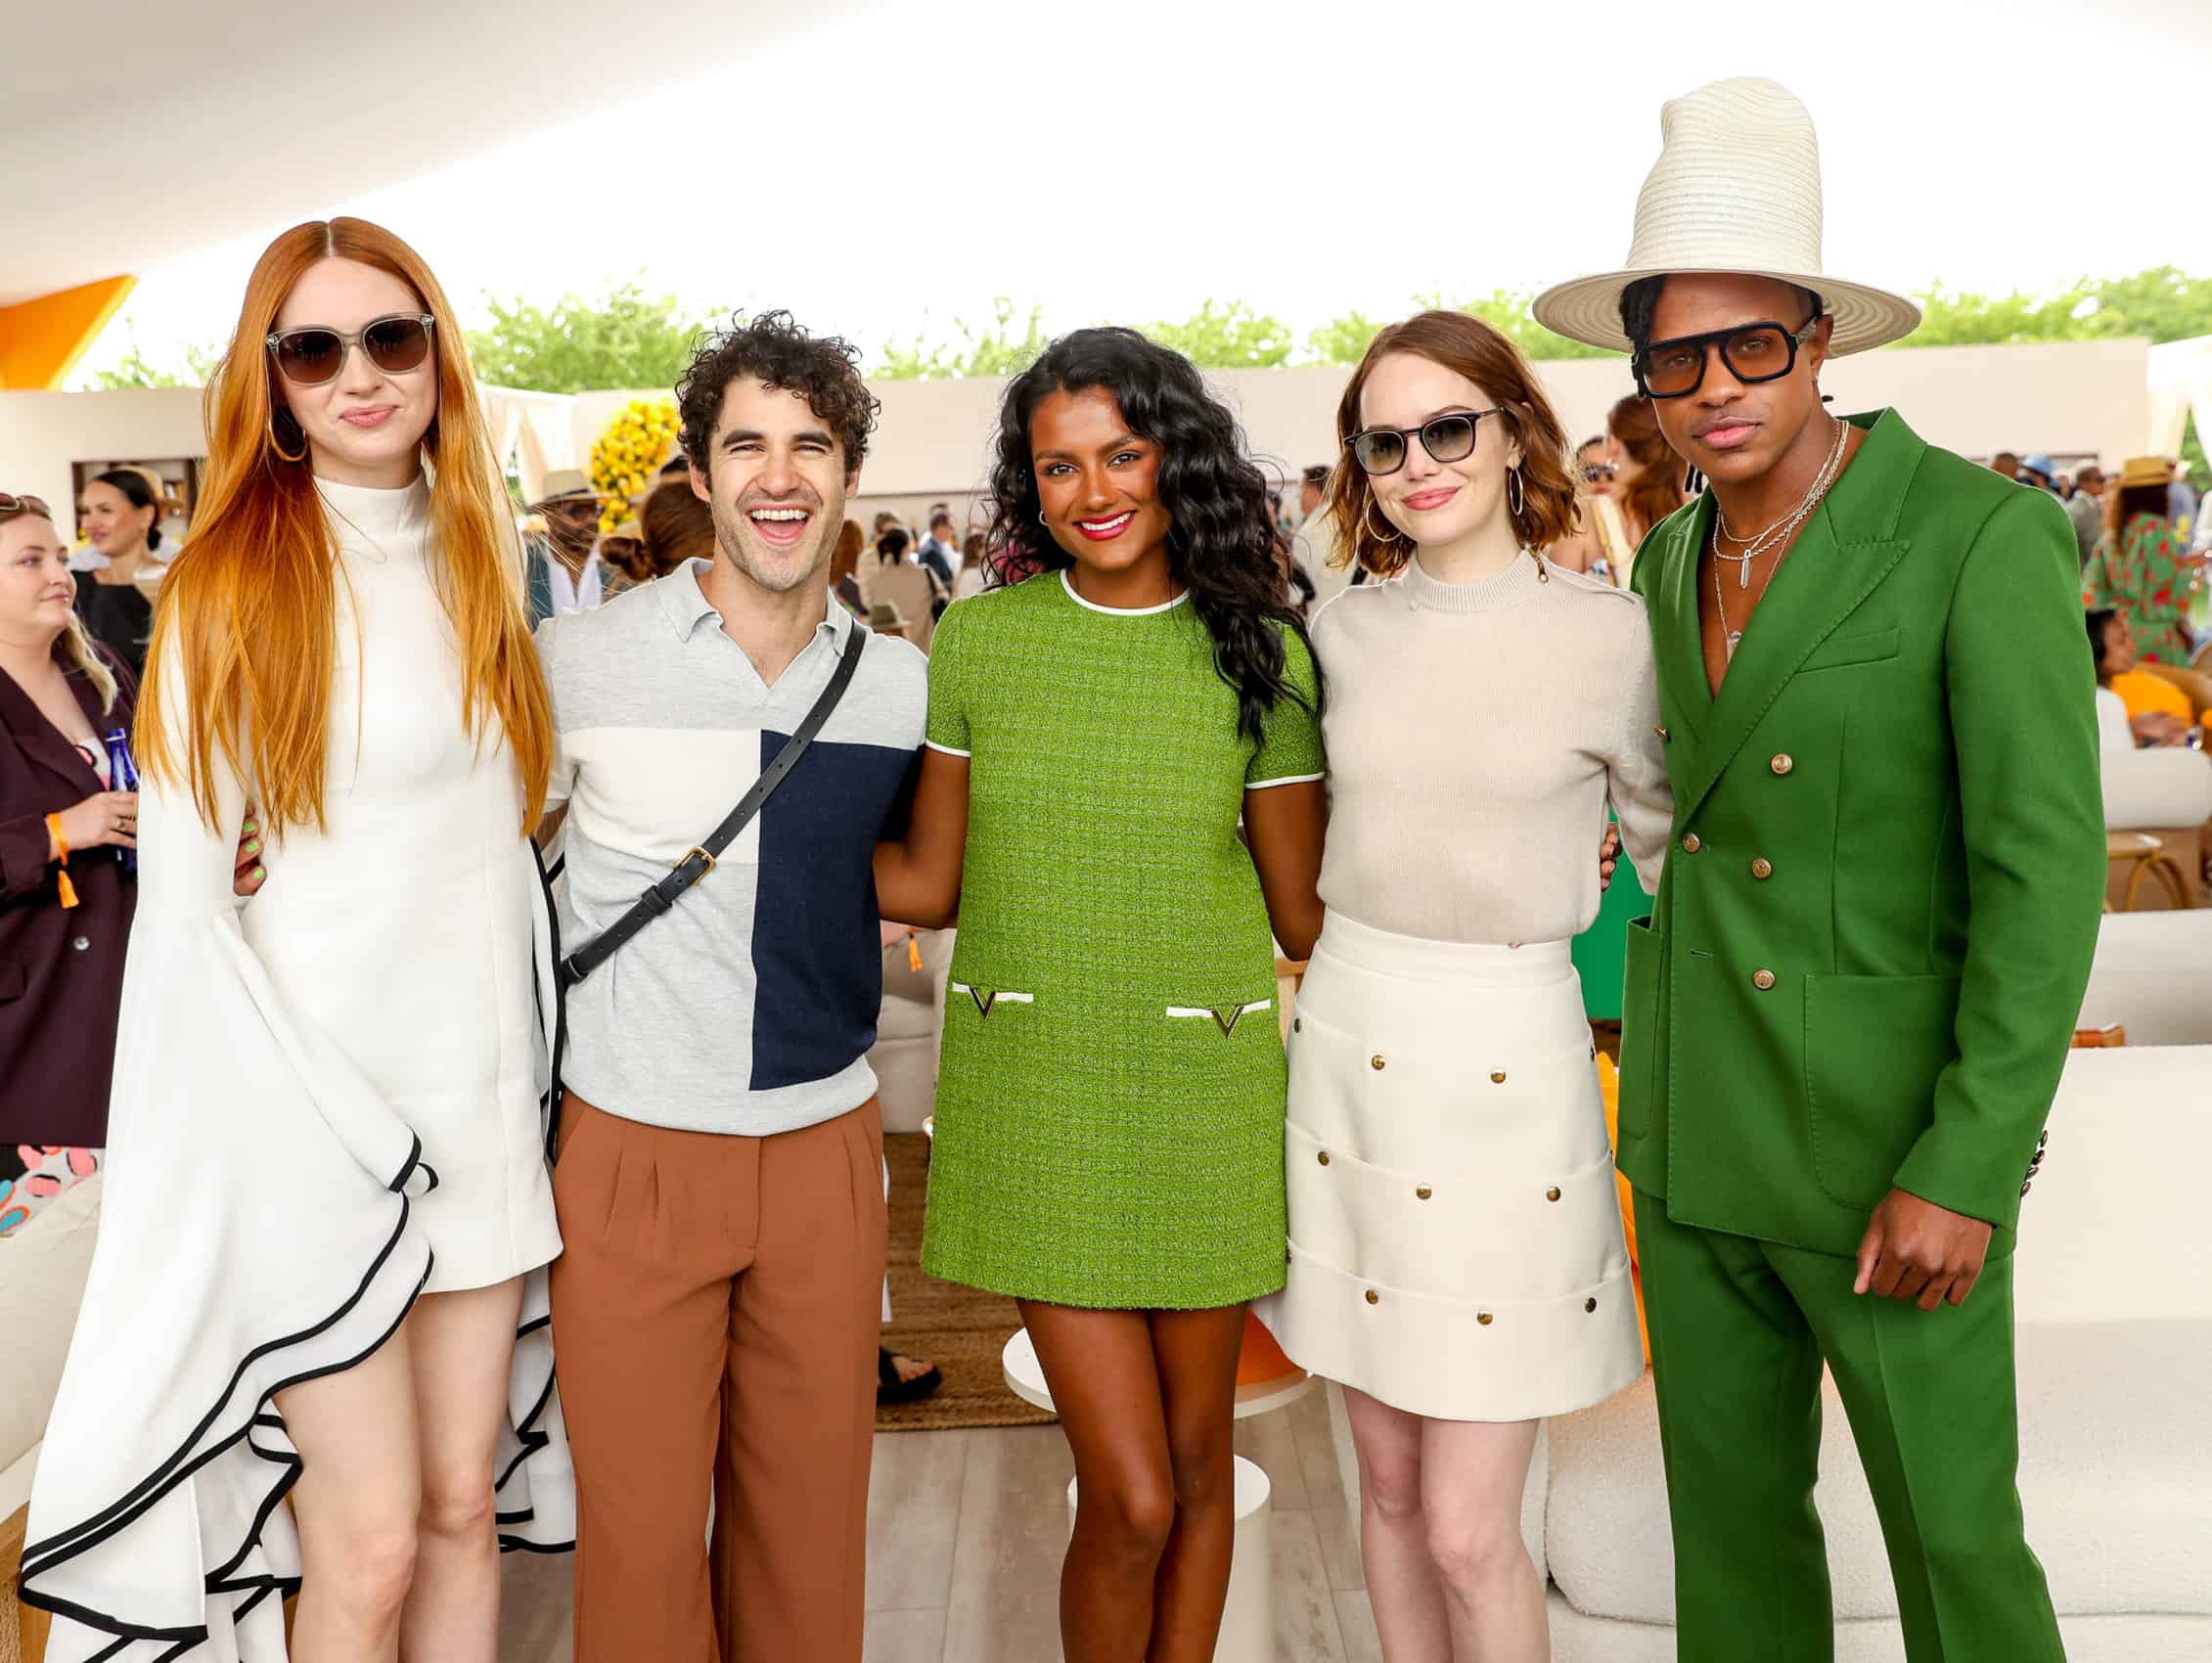 Veuve Clicquot Polo Classic Returned, The Conservatory Ball, and Fendi’s Winning Campaign